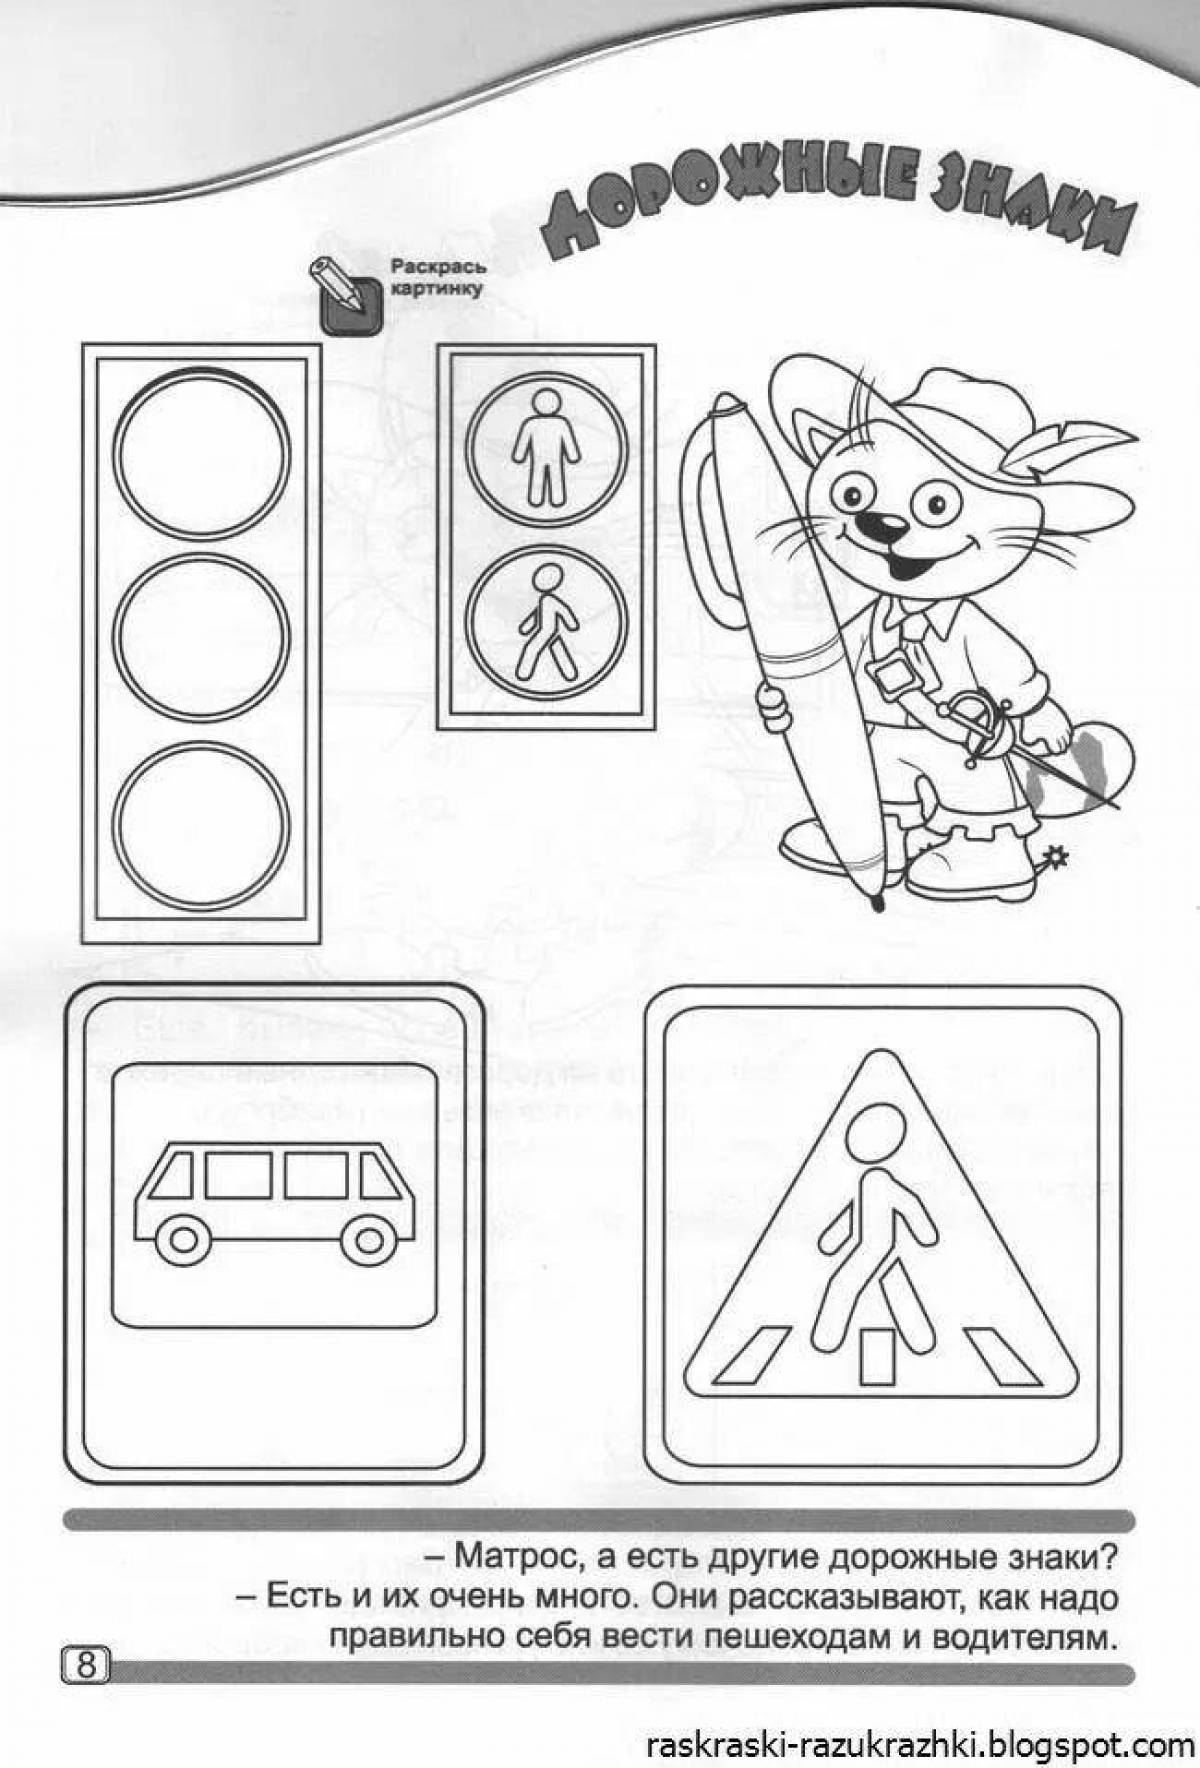 Playful road signs coloring page